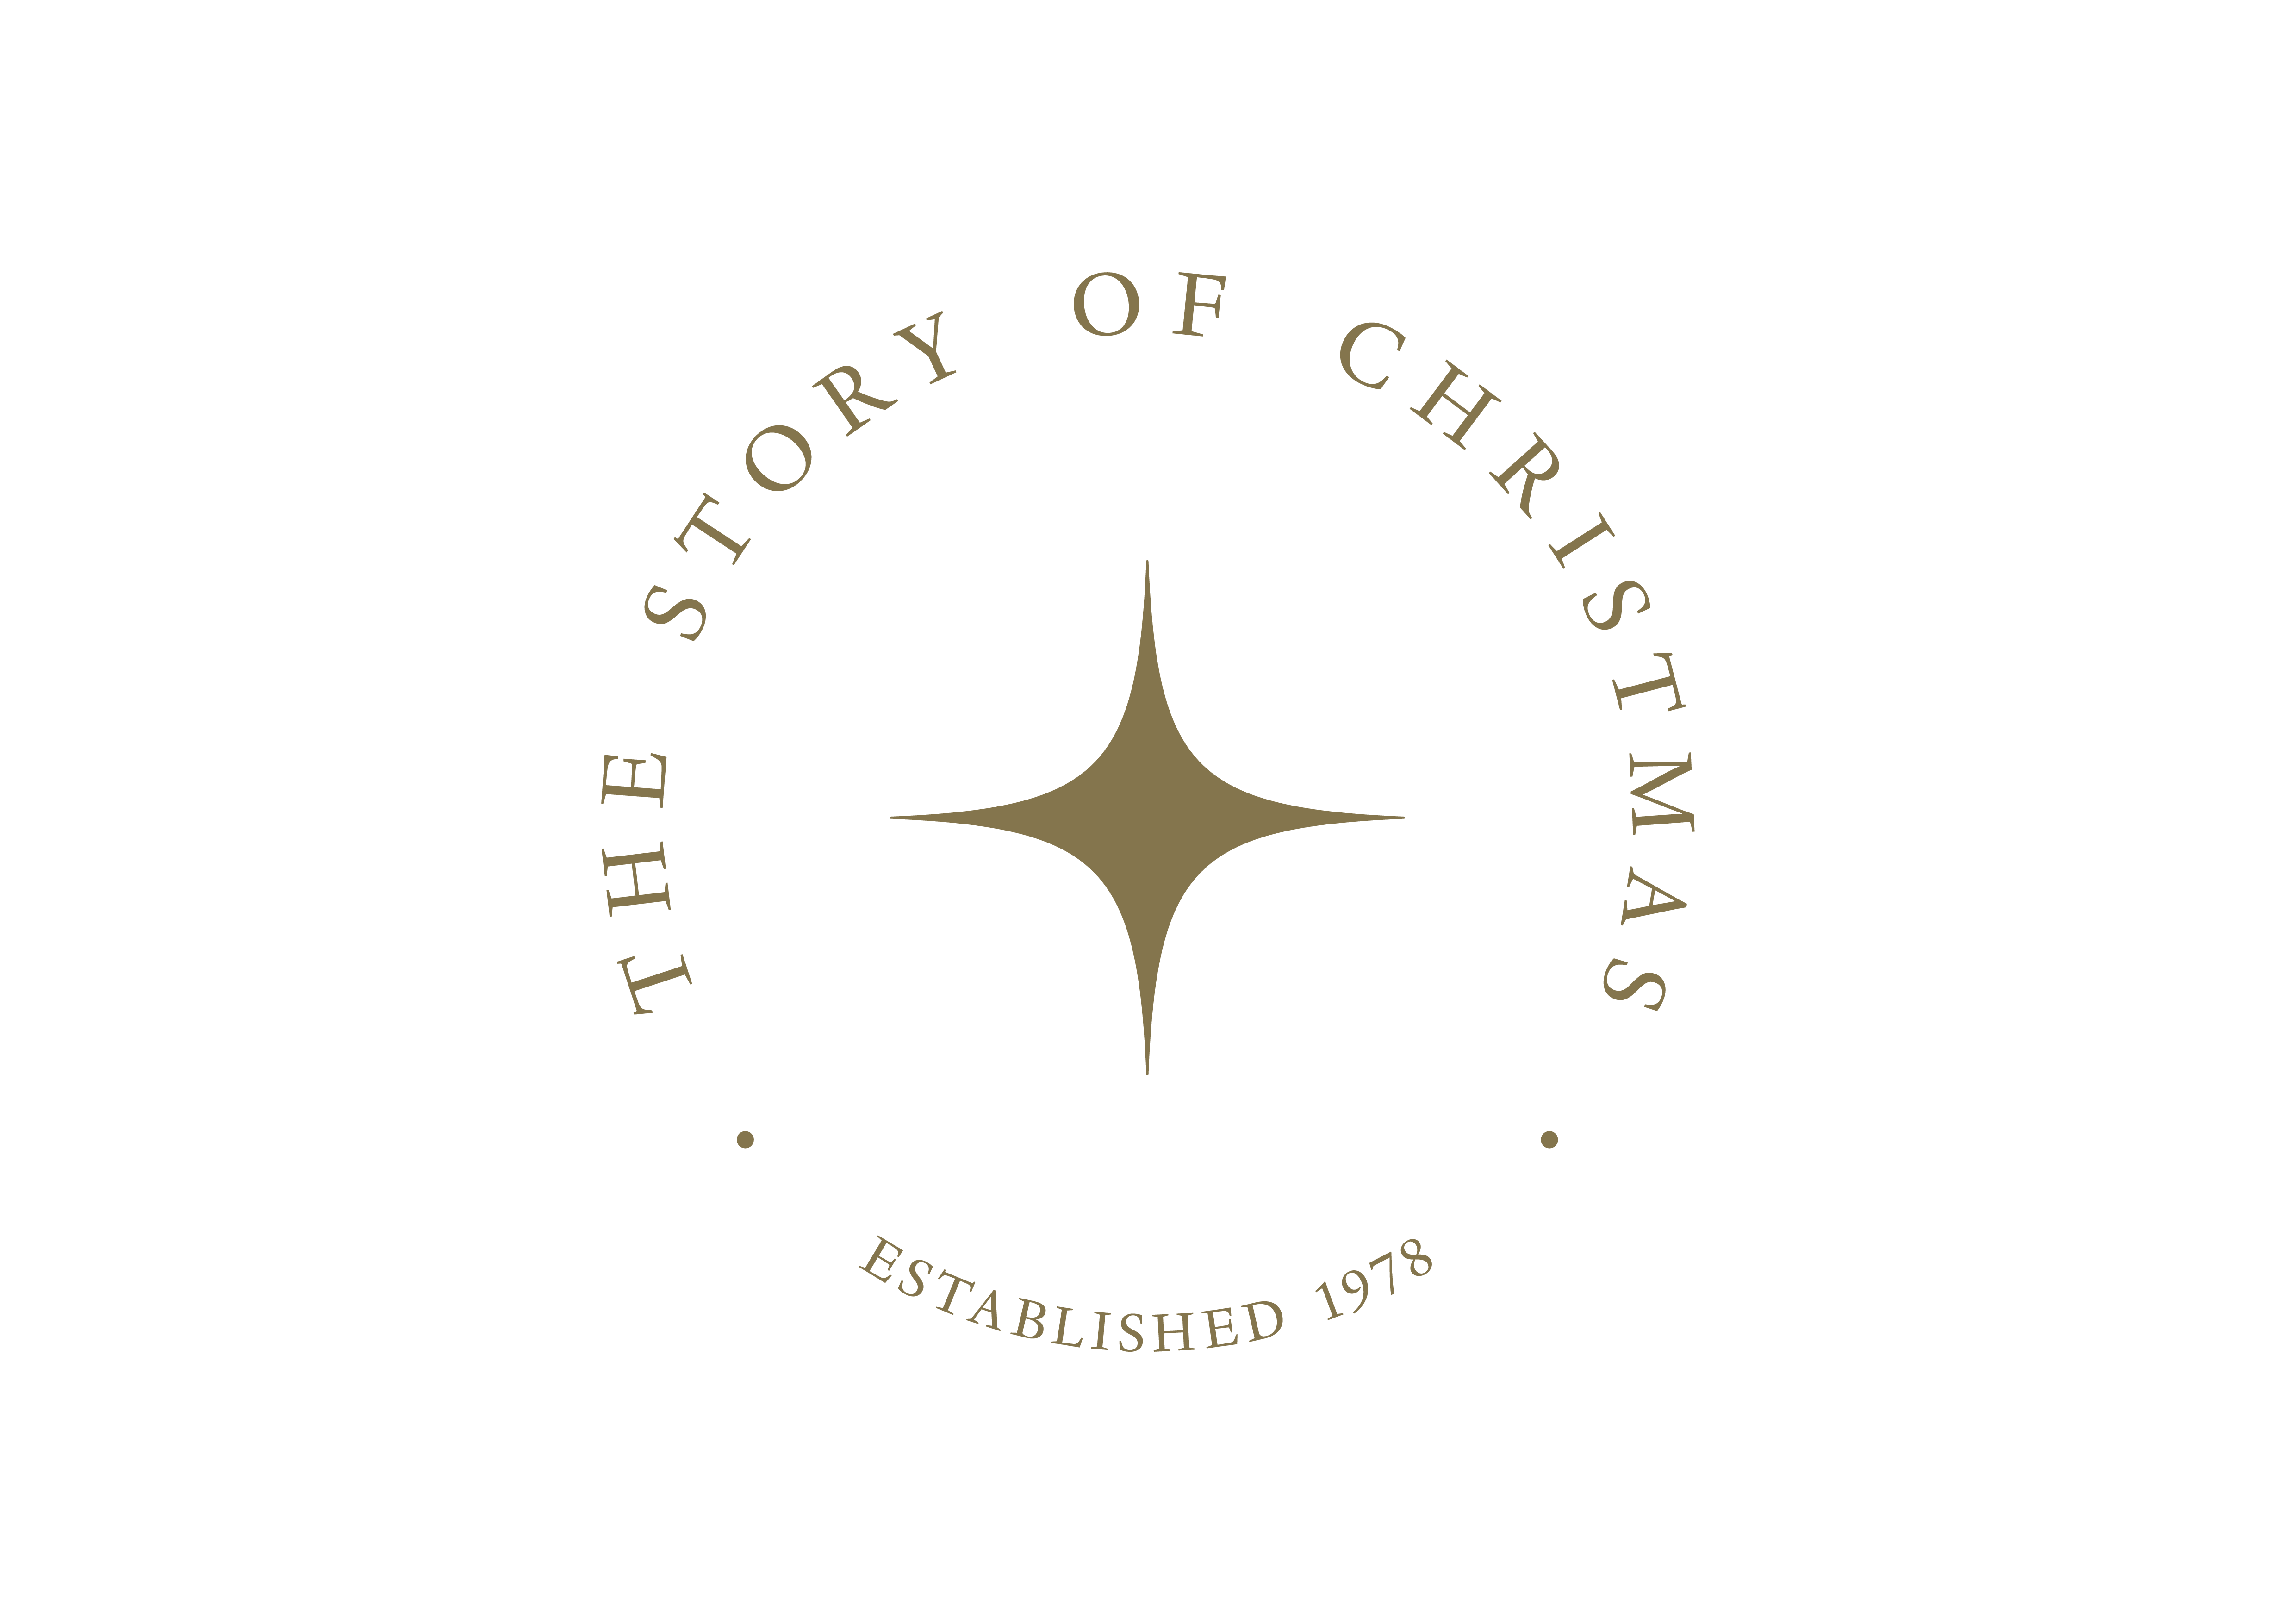 Story of Christmas Appeal